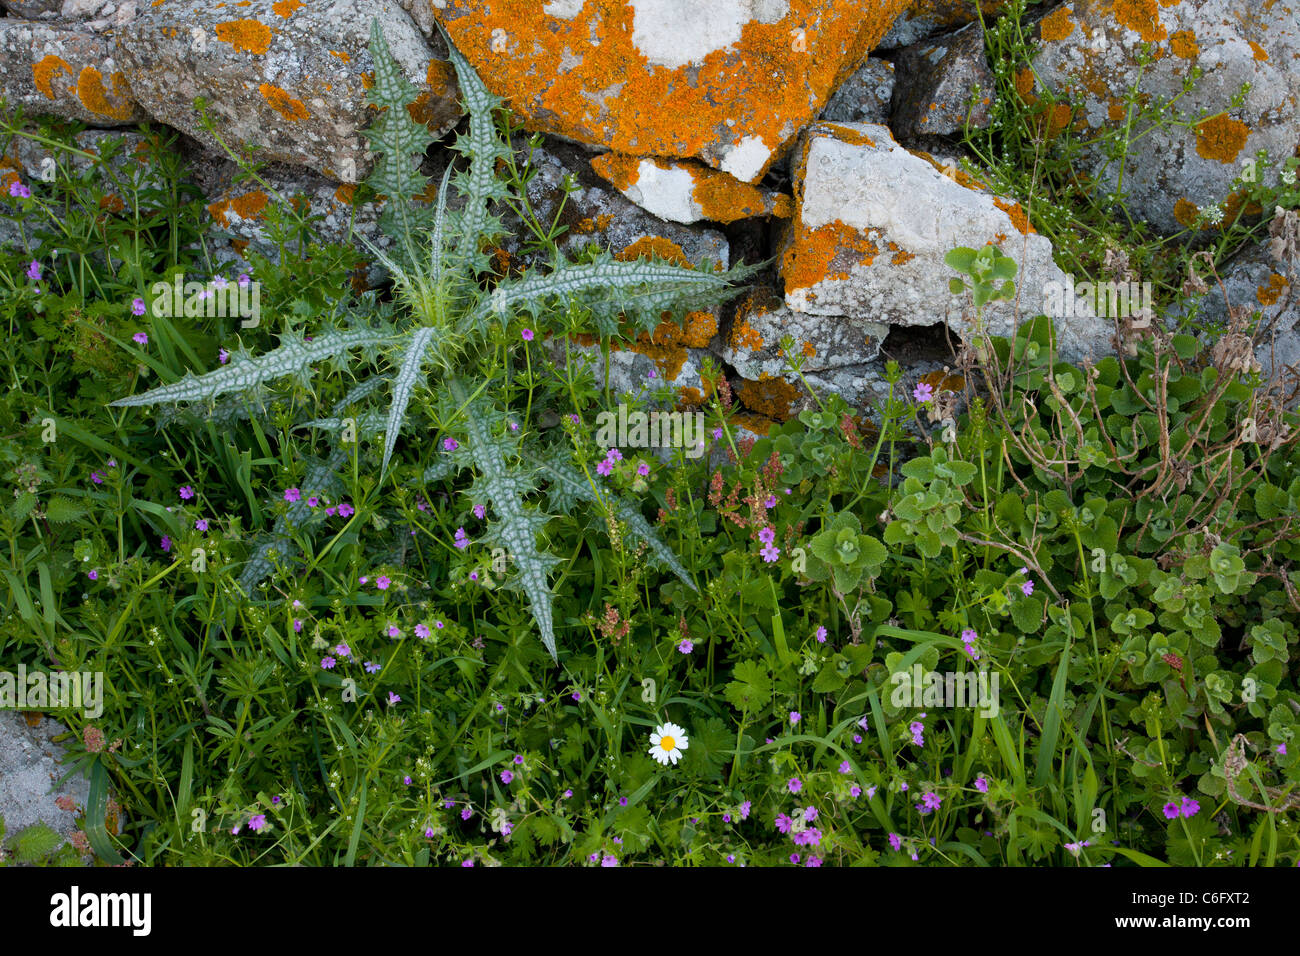 Rosette of a thistle, Picnomon acarna, by lichen-covered wall, with soft cranesbill. Lesvos (Lesbos), Greece. Stock Photo